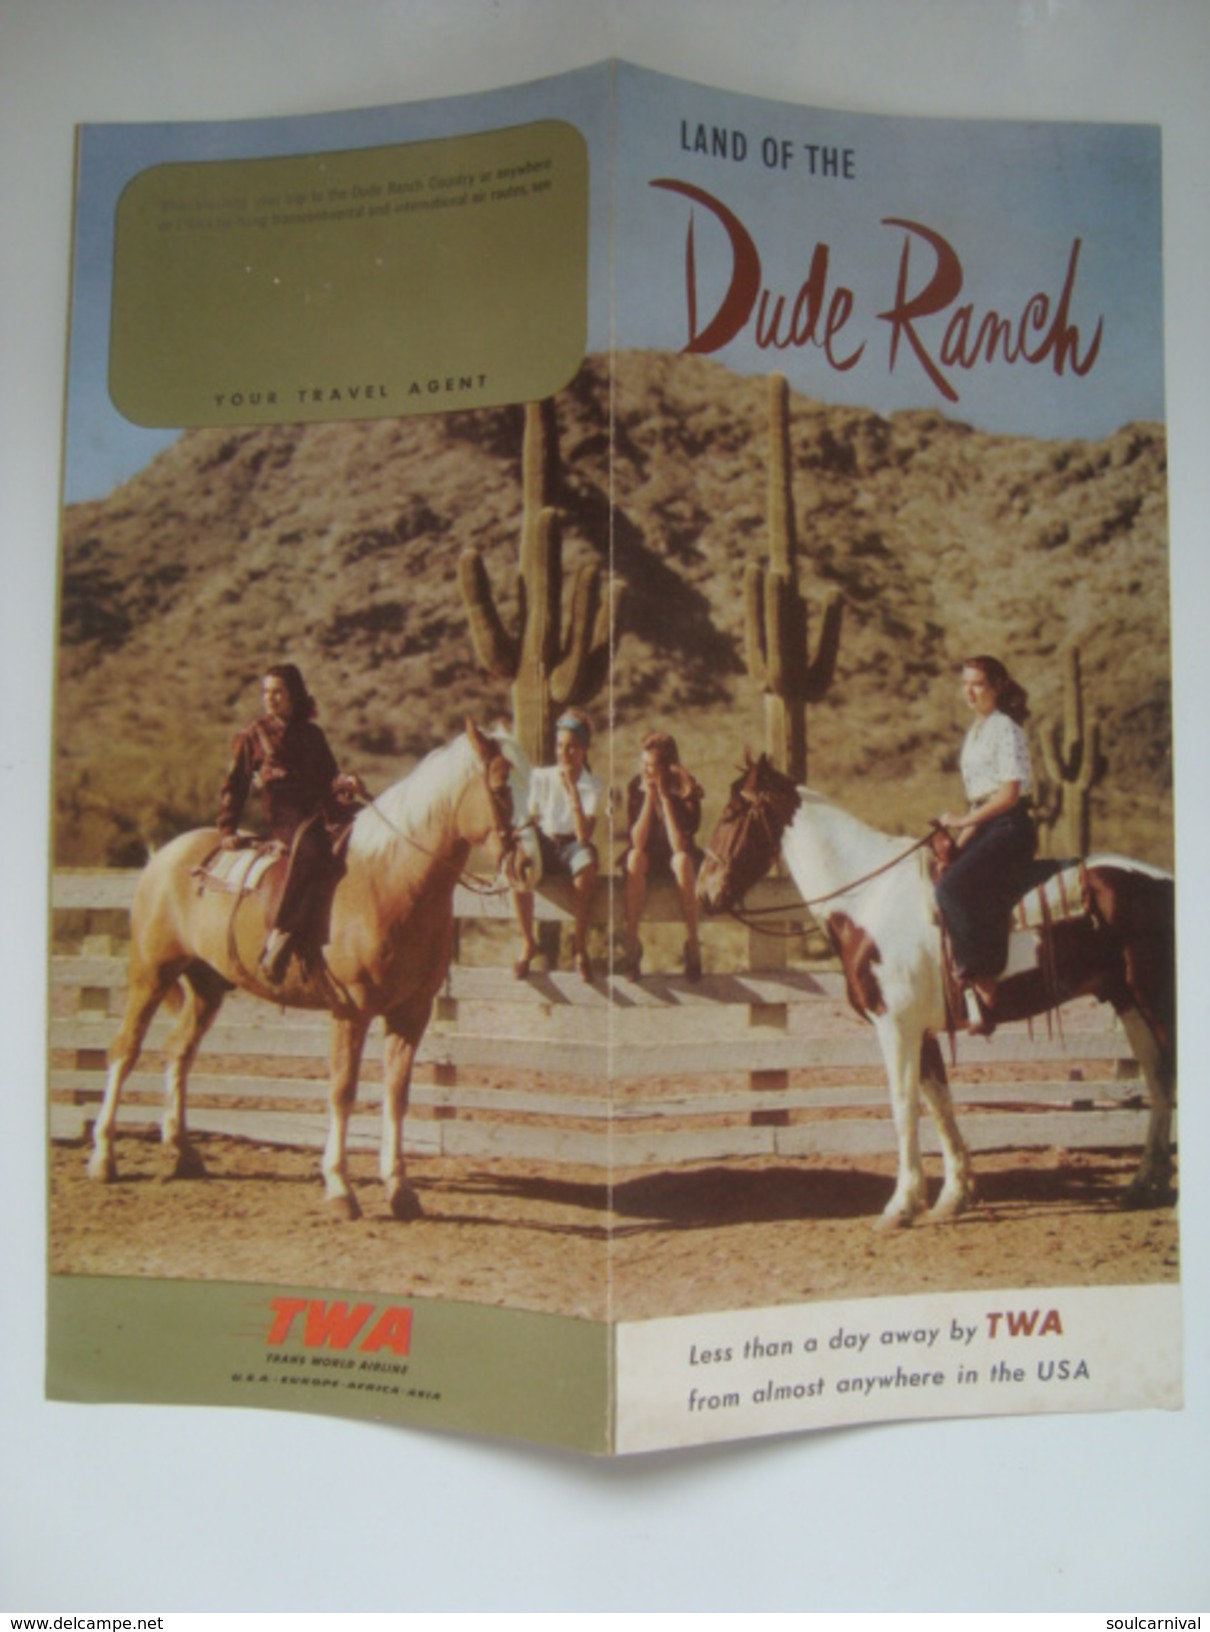 TWA. LAND OF THE DUDE RANCH - USA 50s AVIATION. 6 PAGES PAMPHLET. - Advertisements